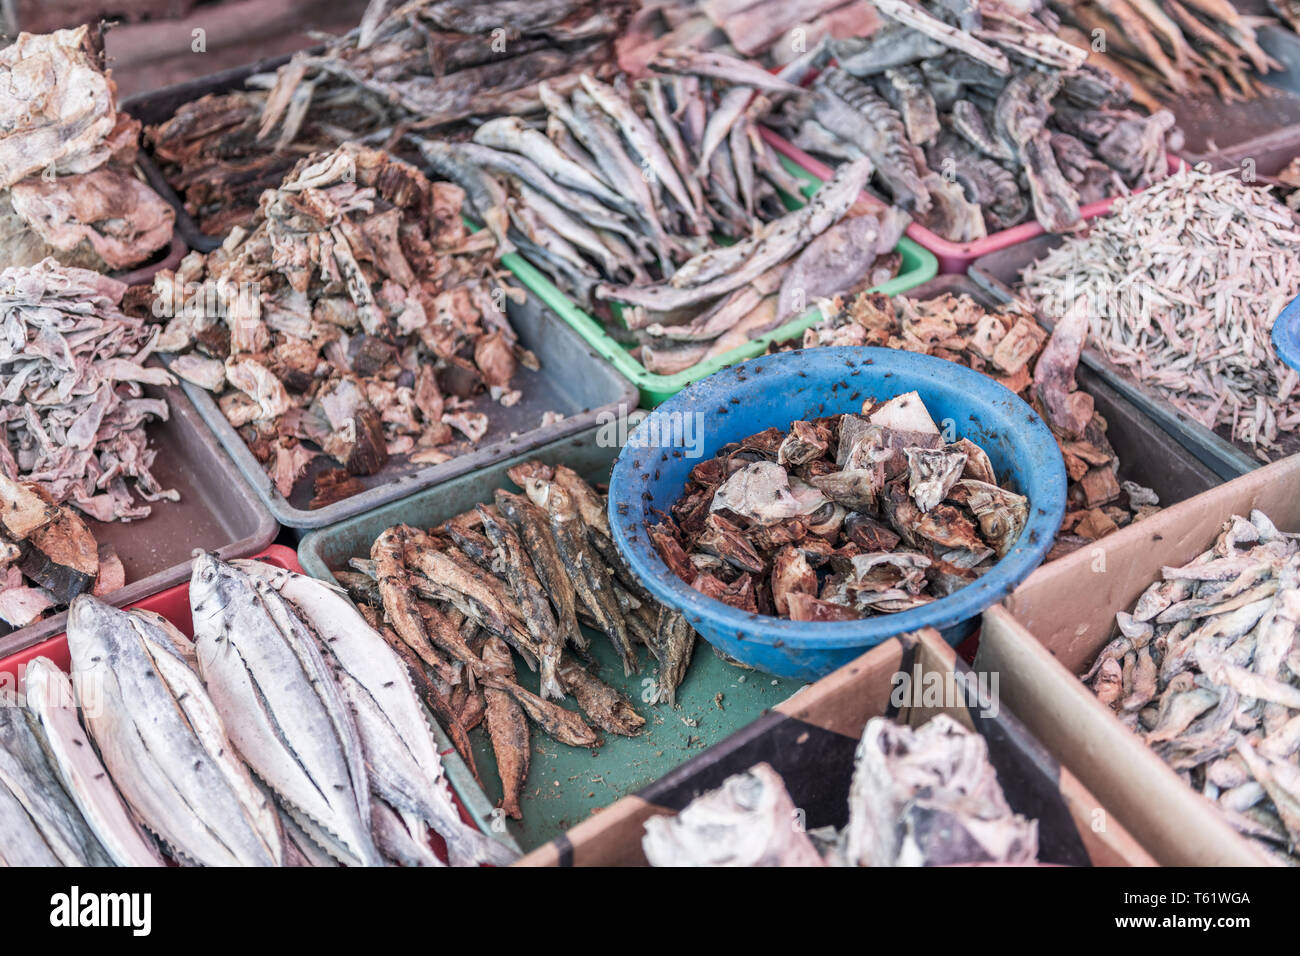 A display of different varieties of dried fish in the midday sun, covered in flies, at the Negombo Fish Market in Sri Lanka. Stock Photo